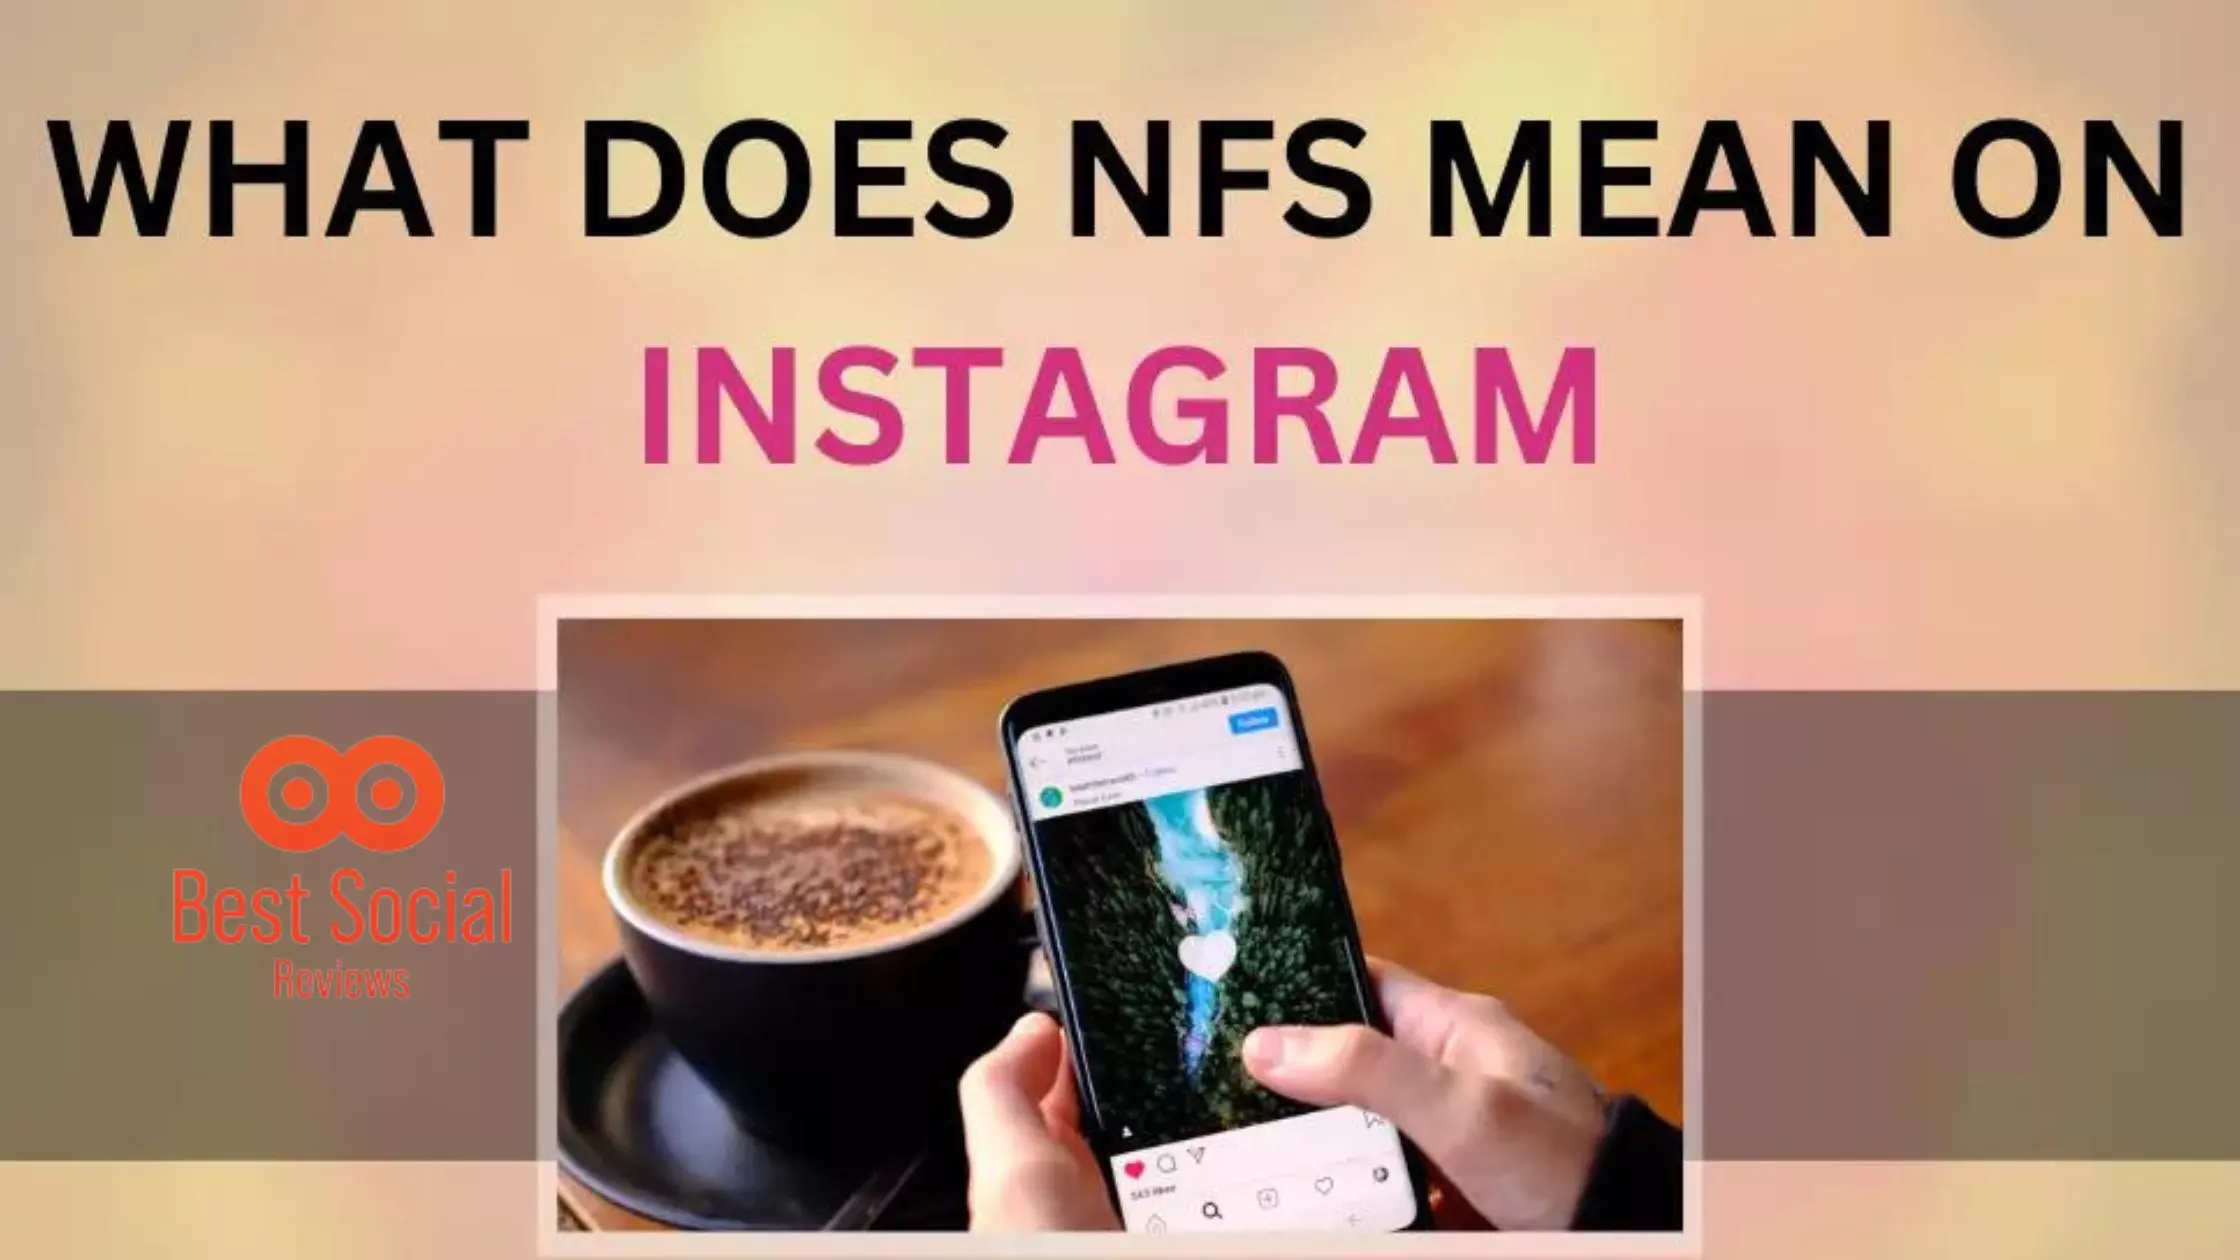 What Does Nfs Mean on Instagram